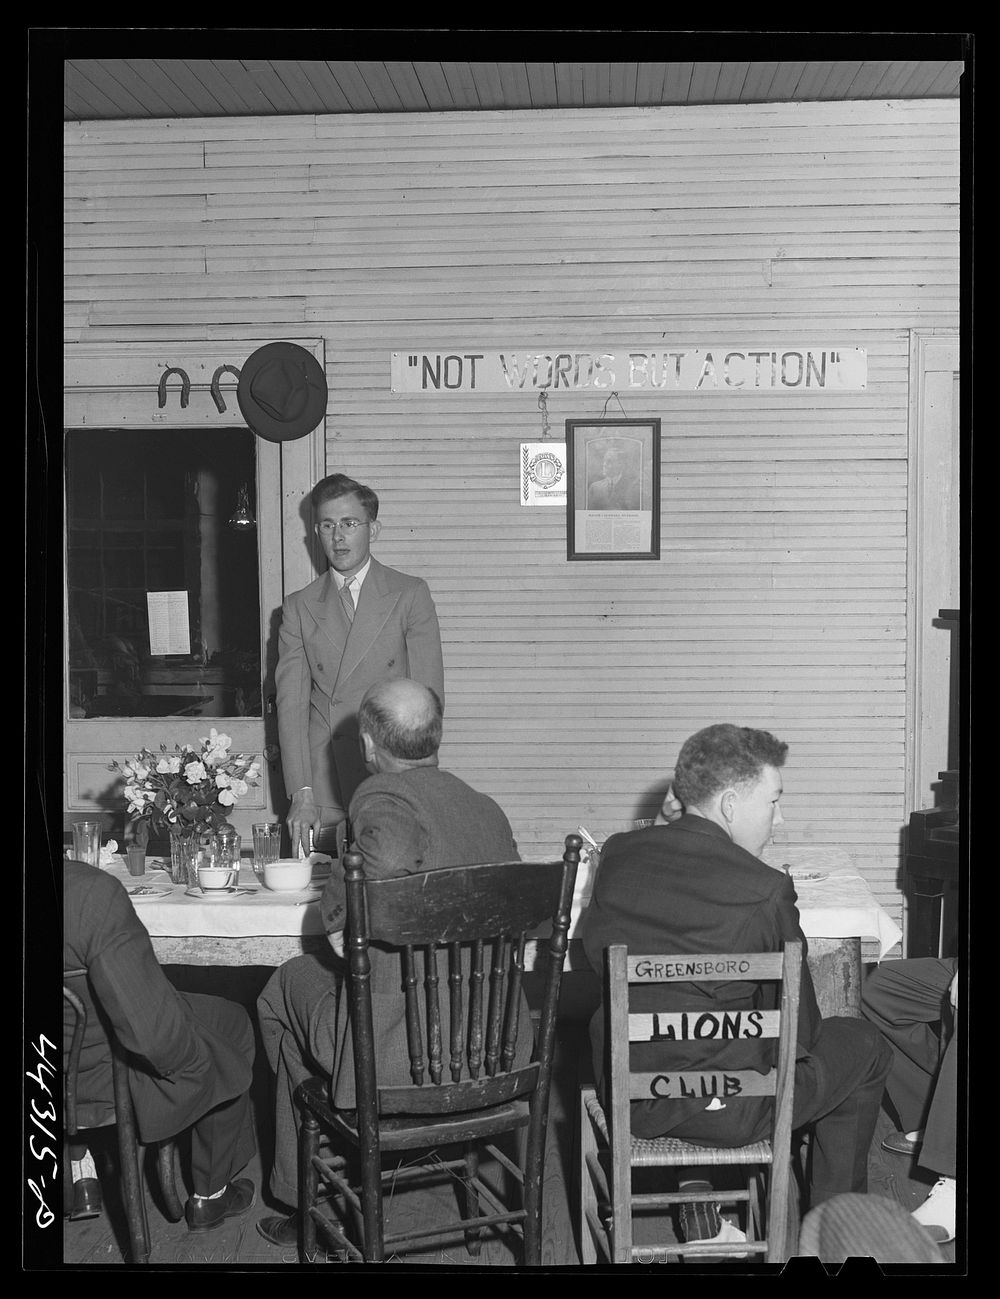 At a meeting of the Lions Club in Greensboro. Greene County, Georgia. Sourced from the Library of Congress.